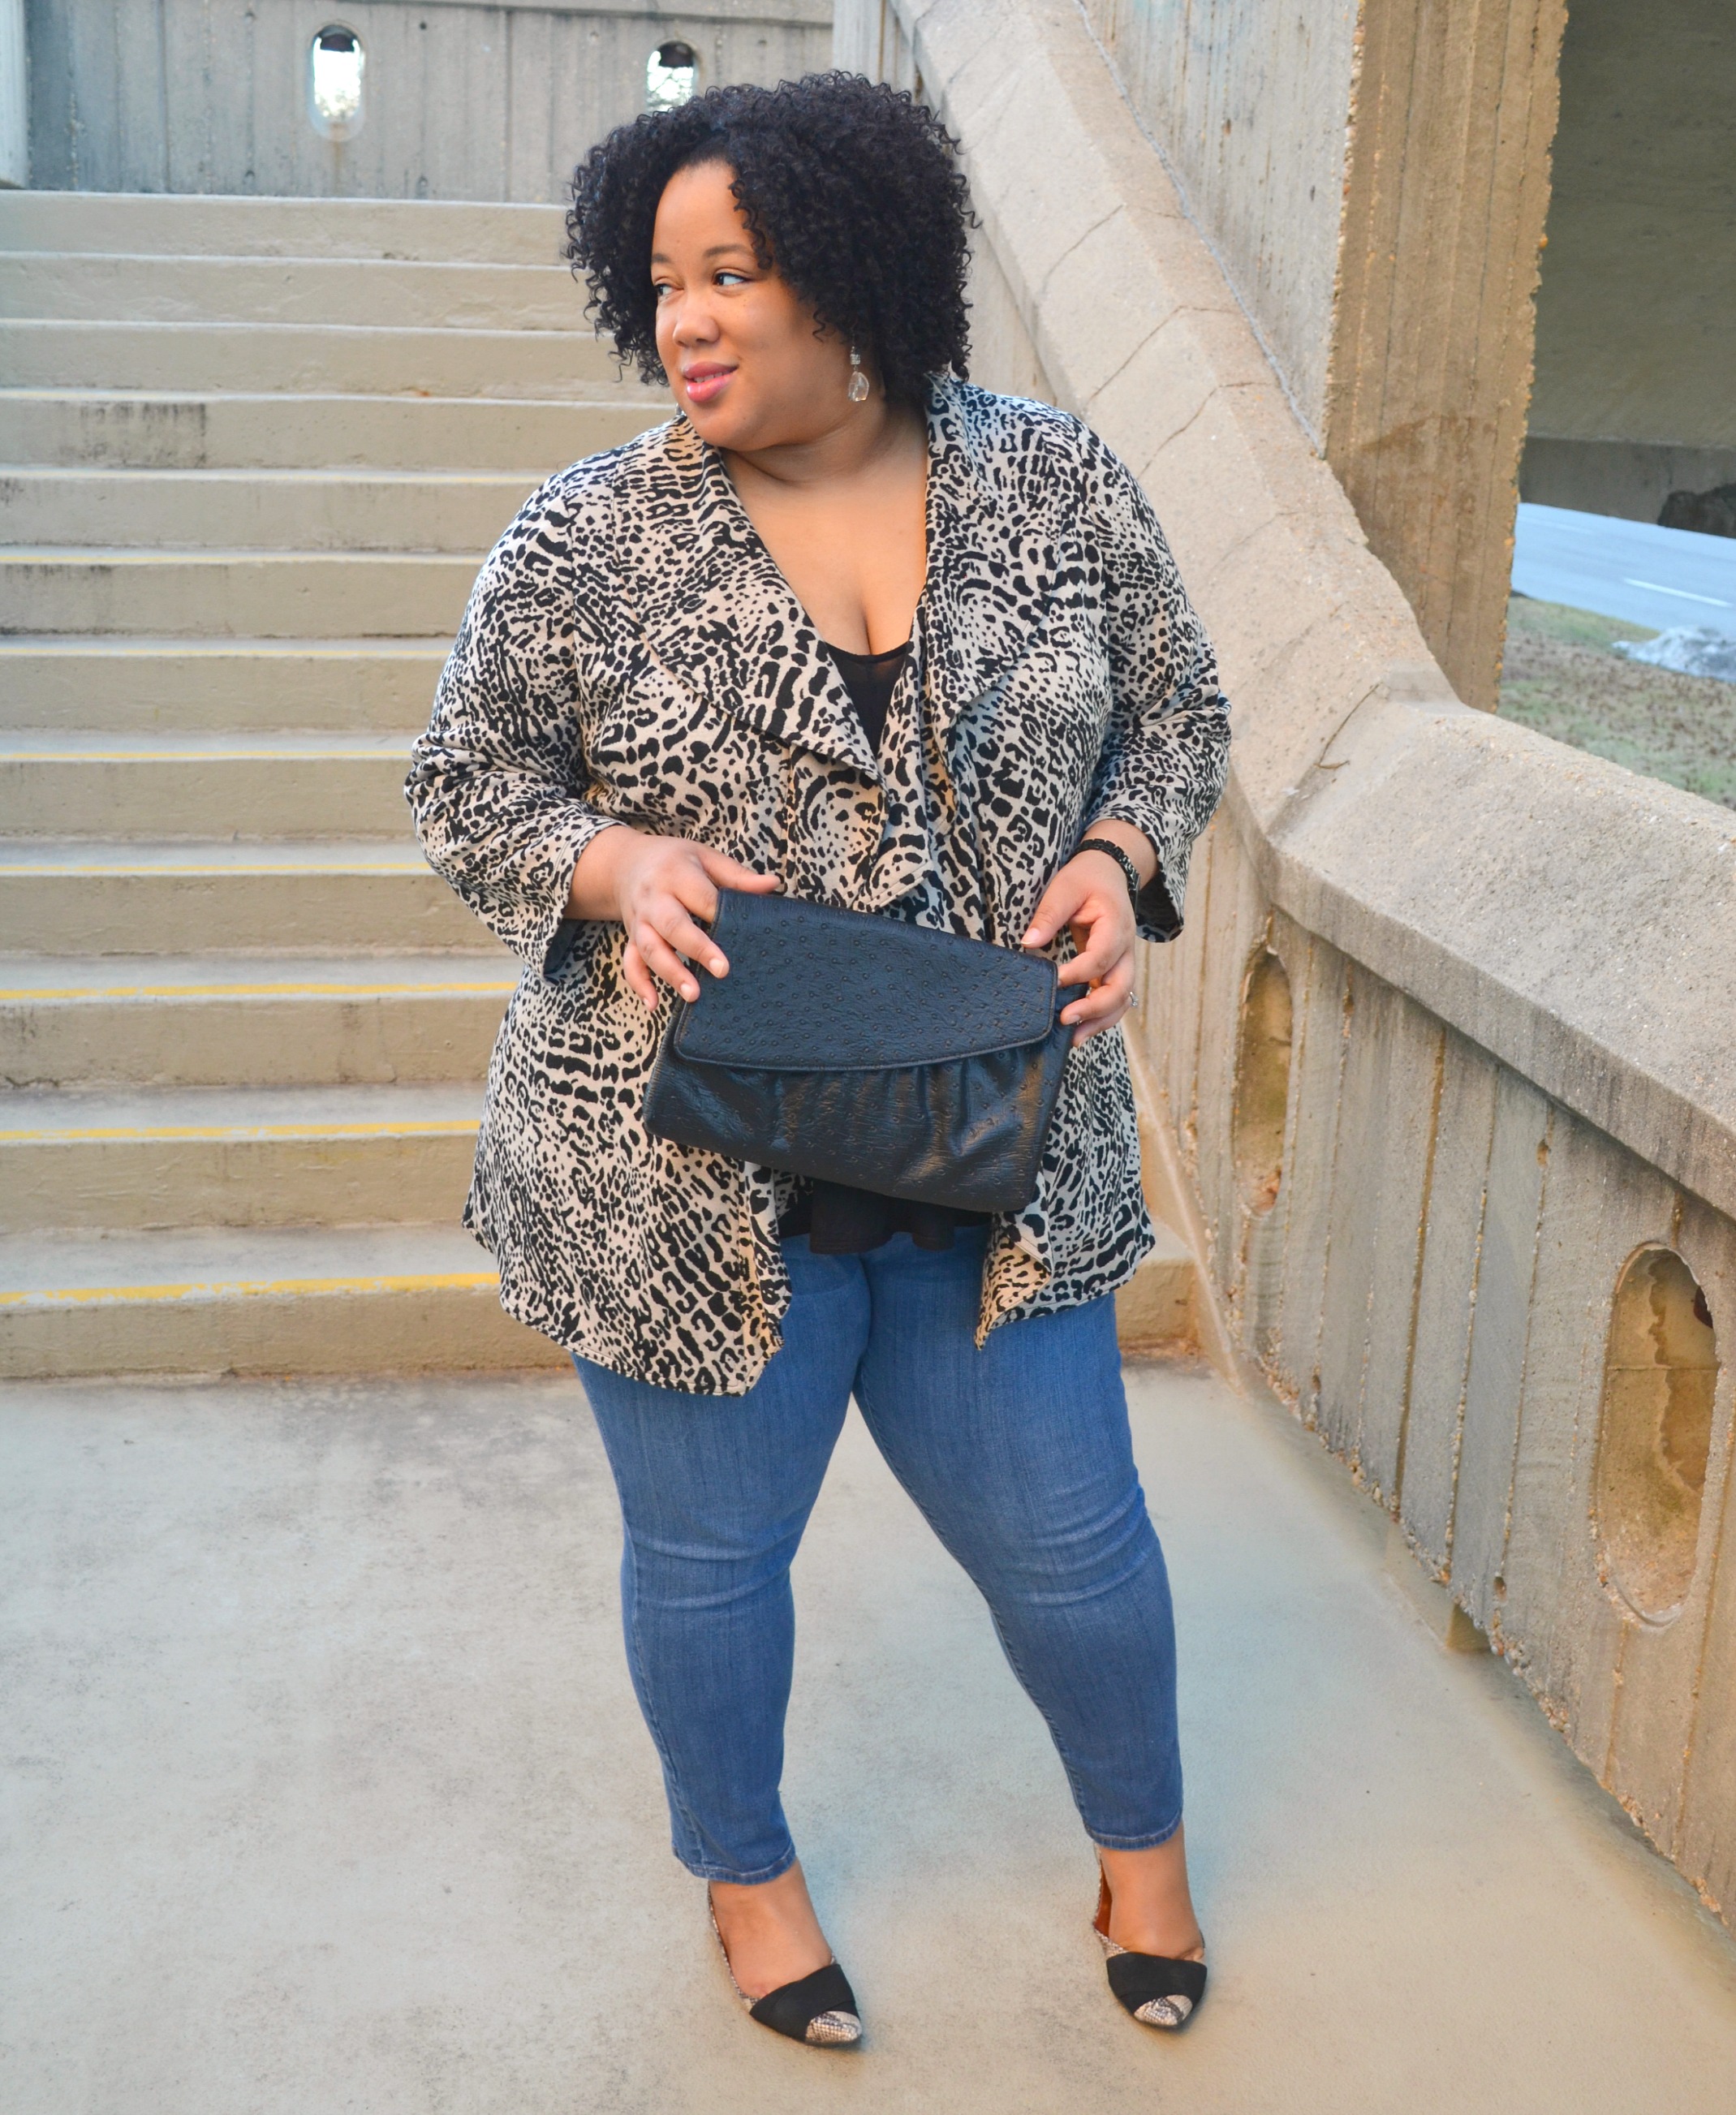 Denim and Animal Print Outfit